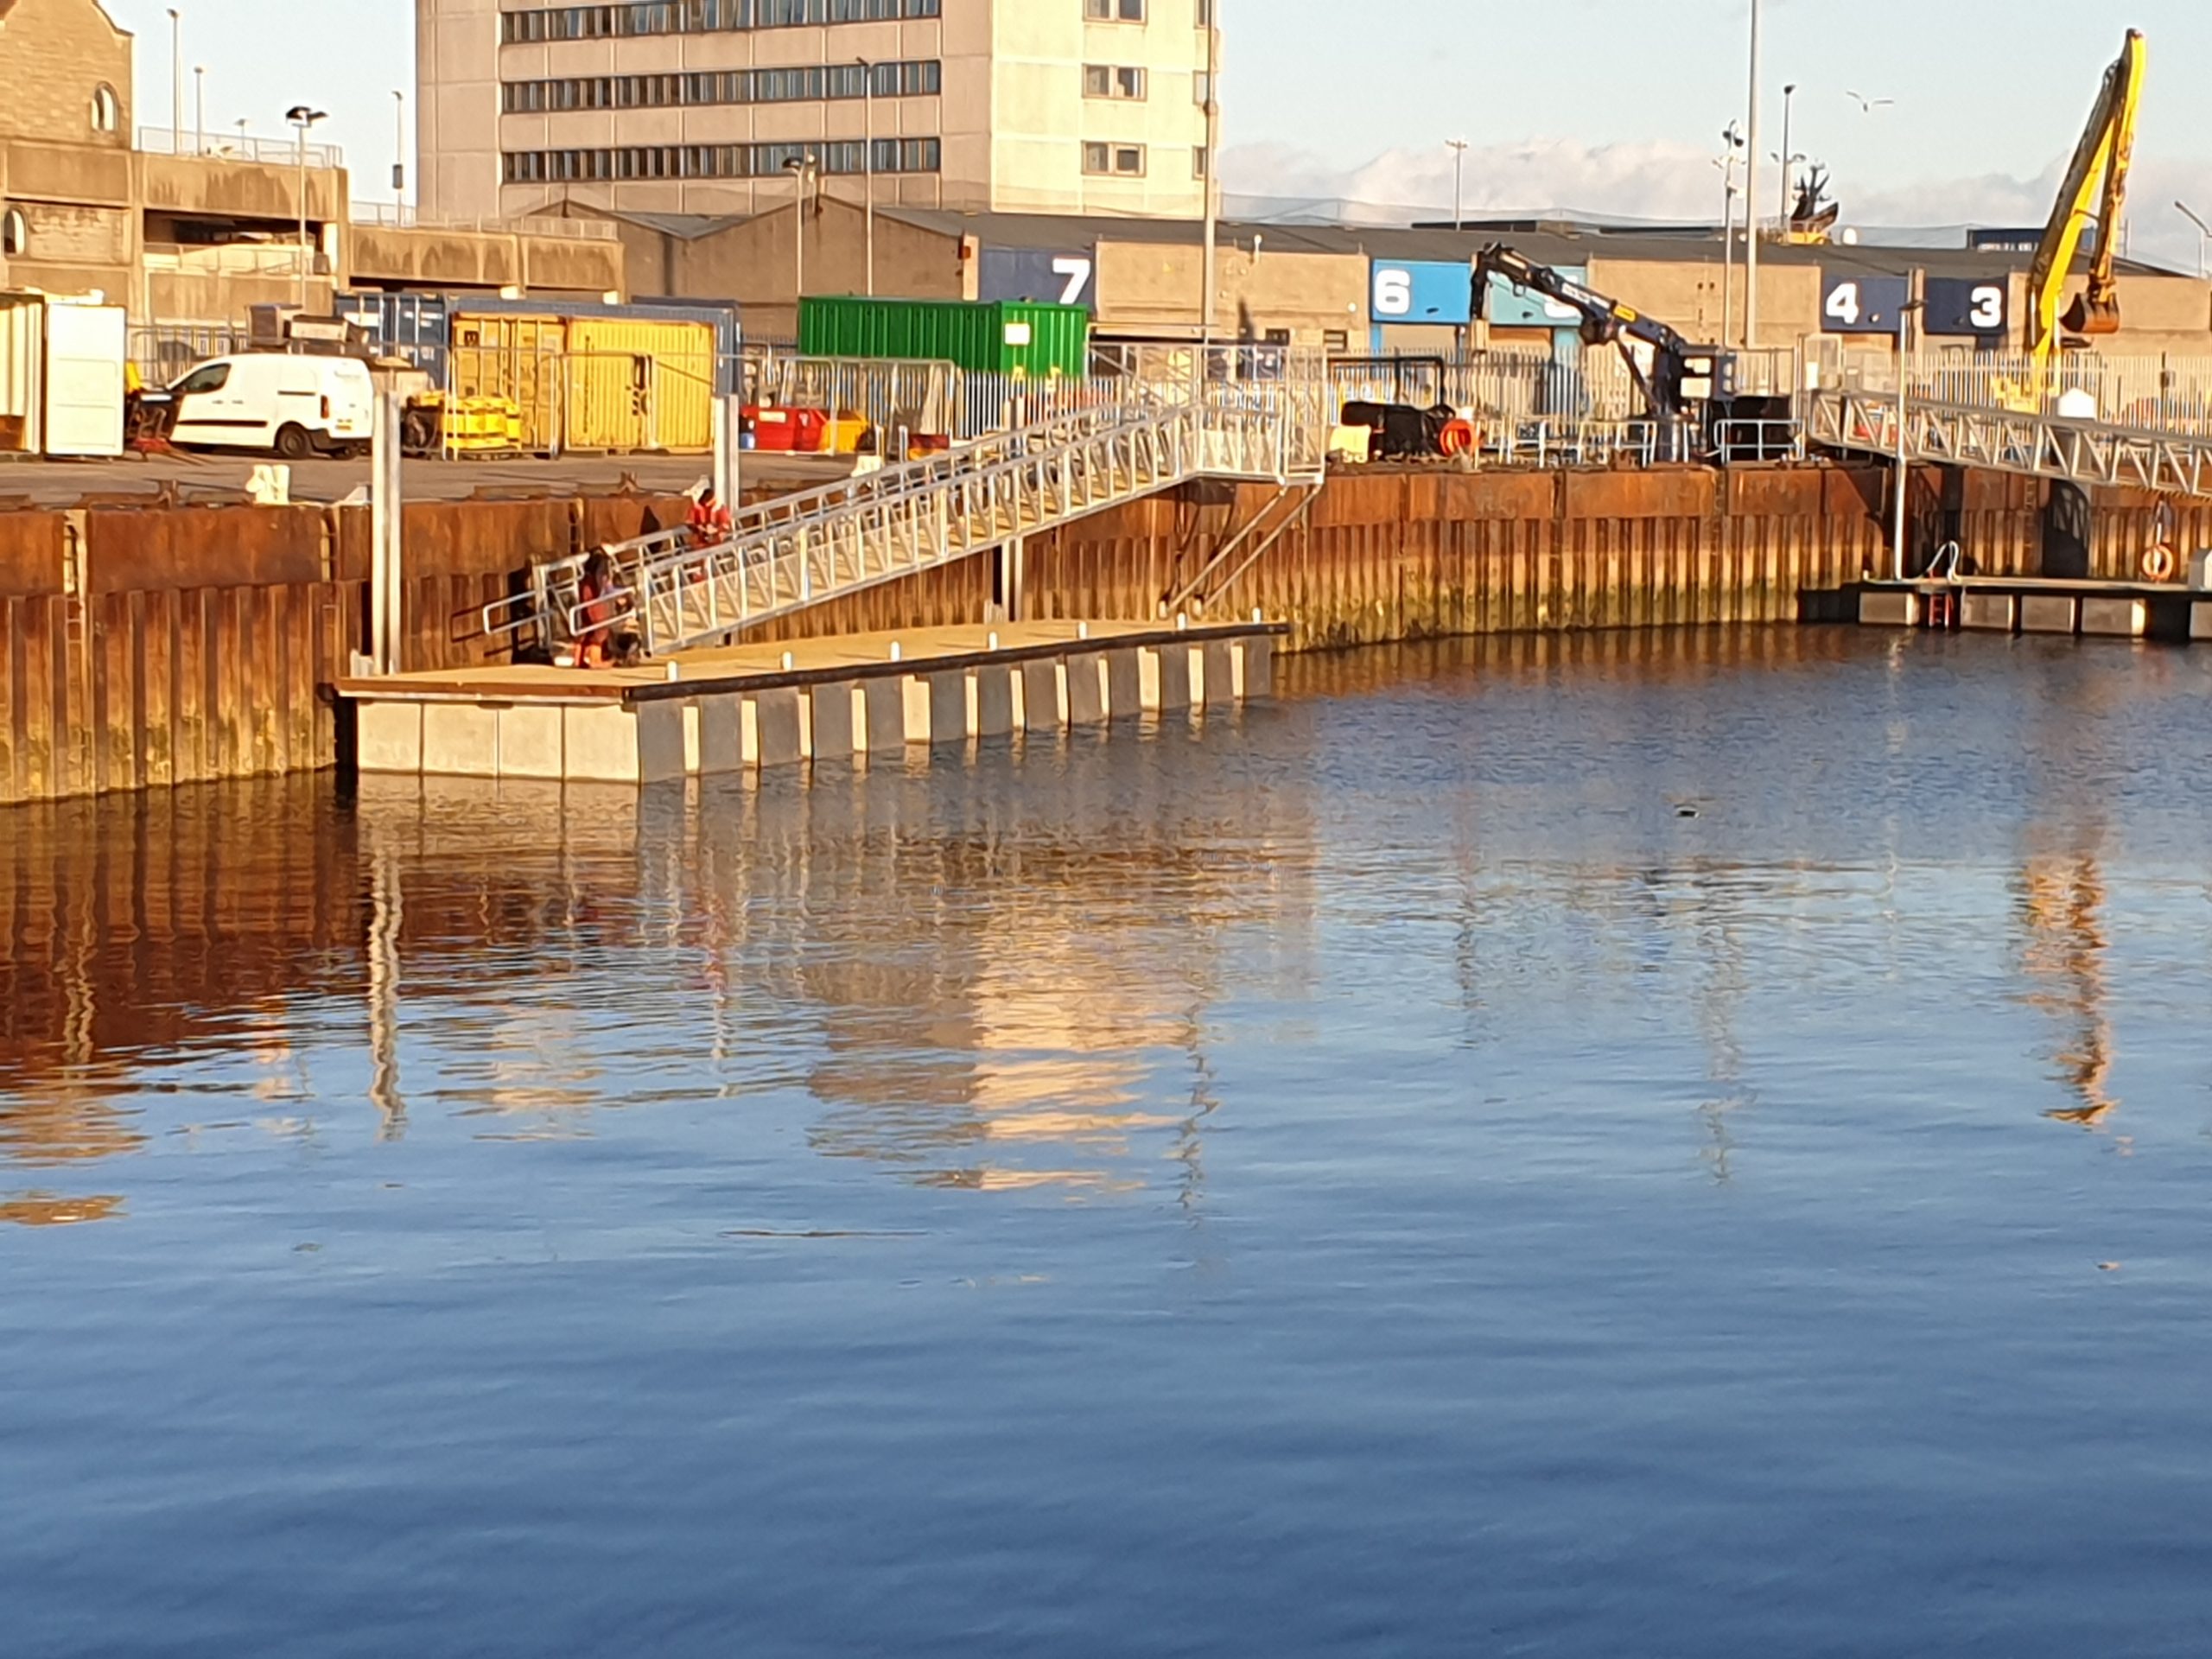 Crew transfer vessel berth attached to quay wall